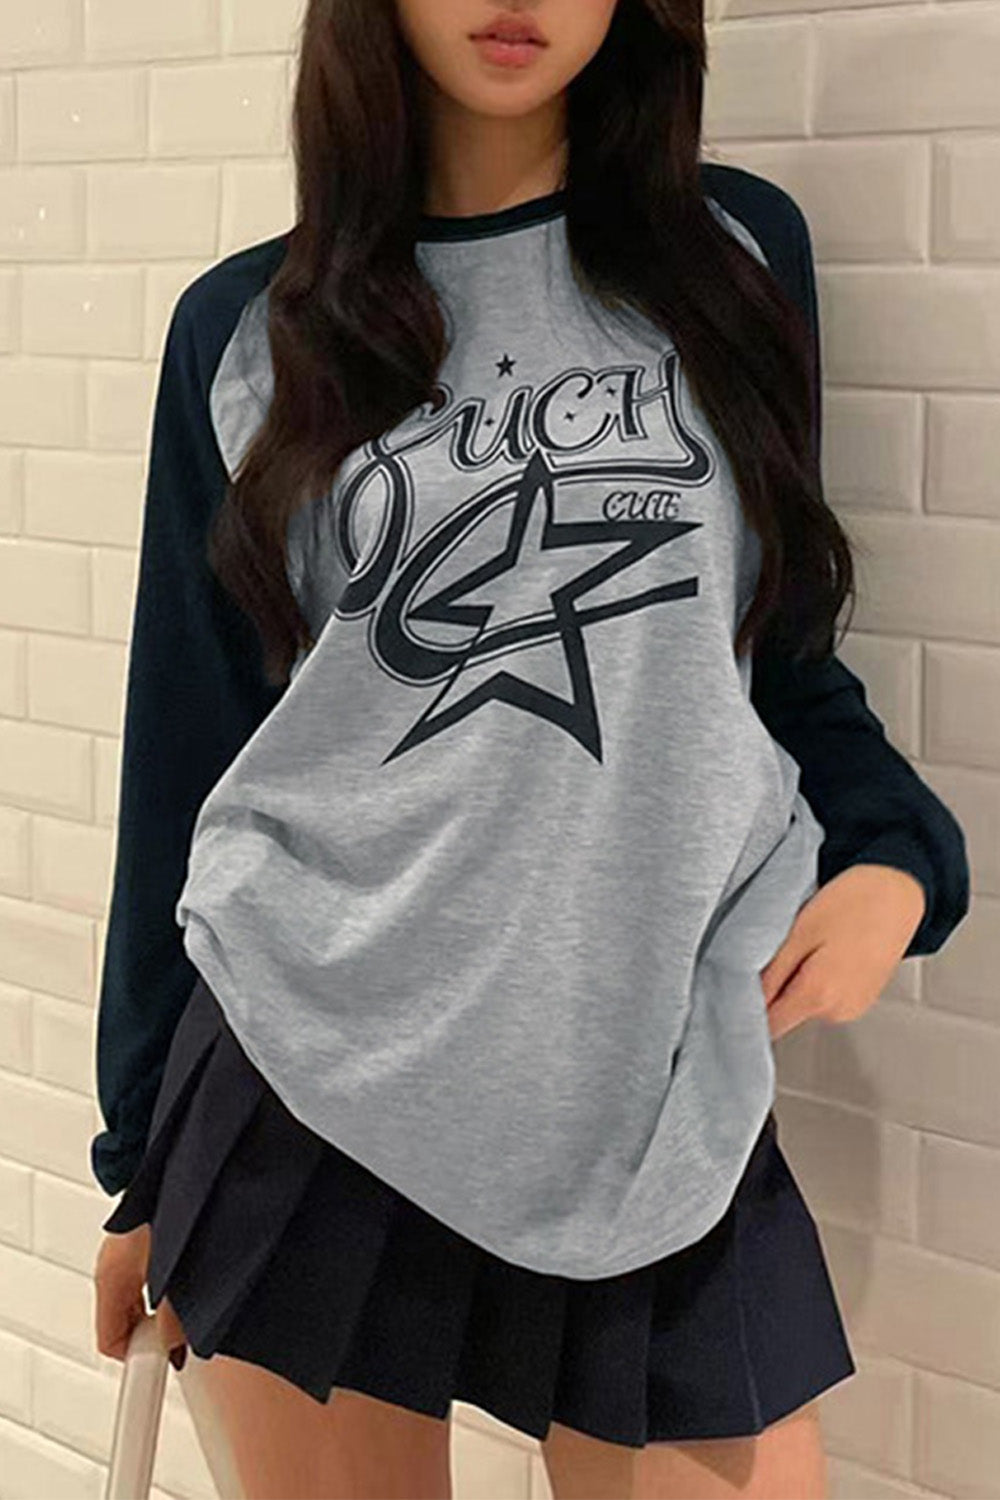 Star Letter Graphic Print Long Sleeve Grey T-Shirt